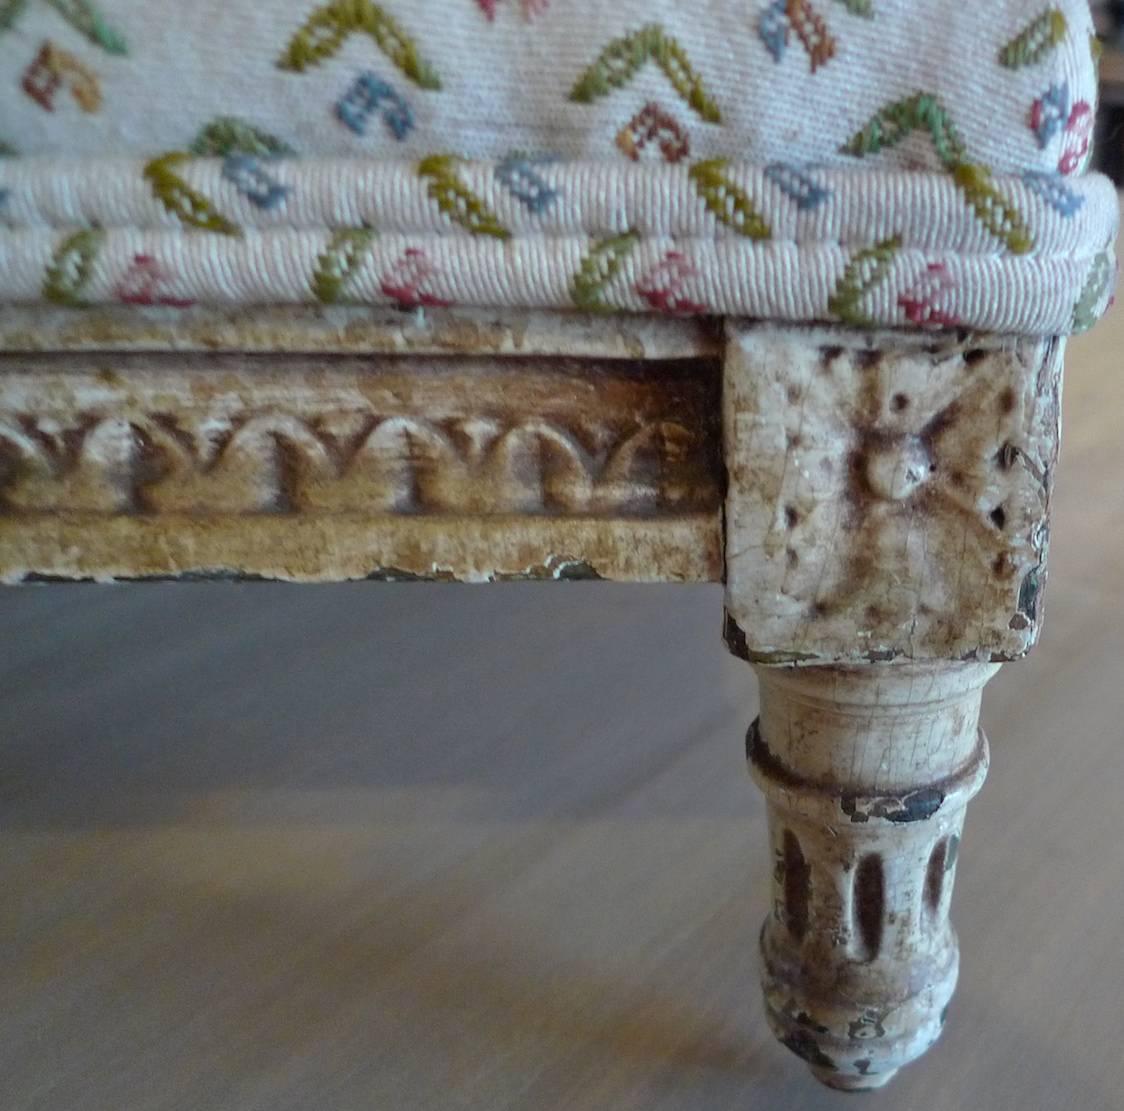 French 19th Century Four-Leg Foot Stool Newly Re-Upholstered with Vintage Fabric (Handbemalt)